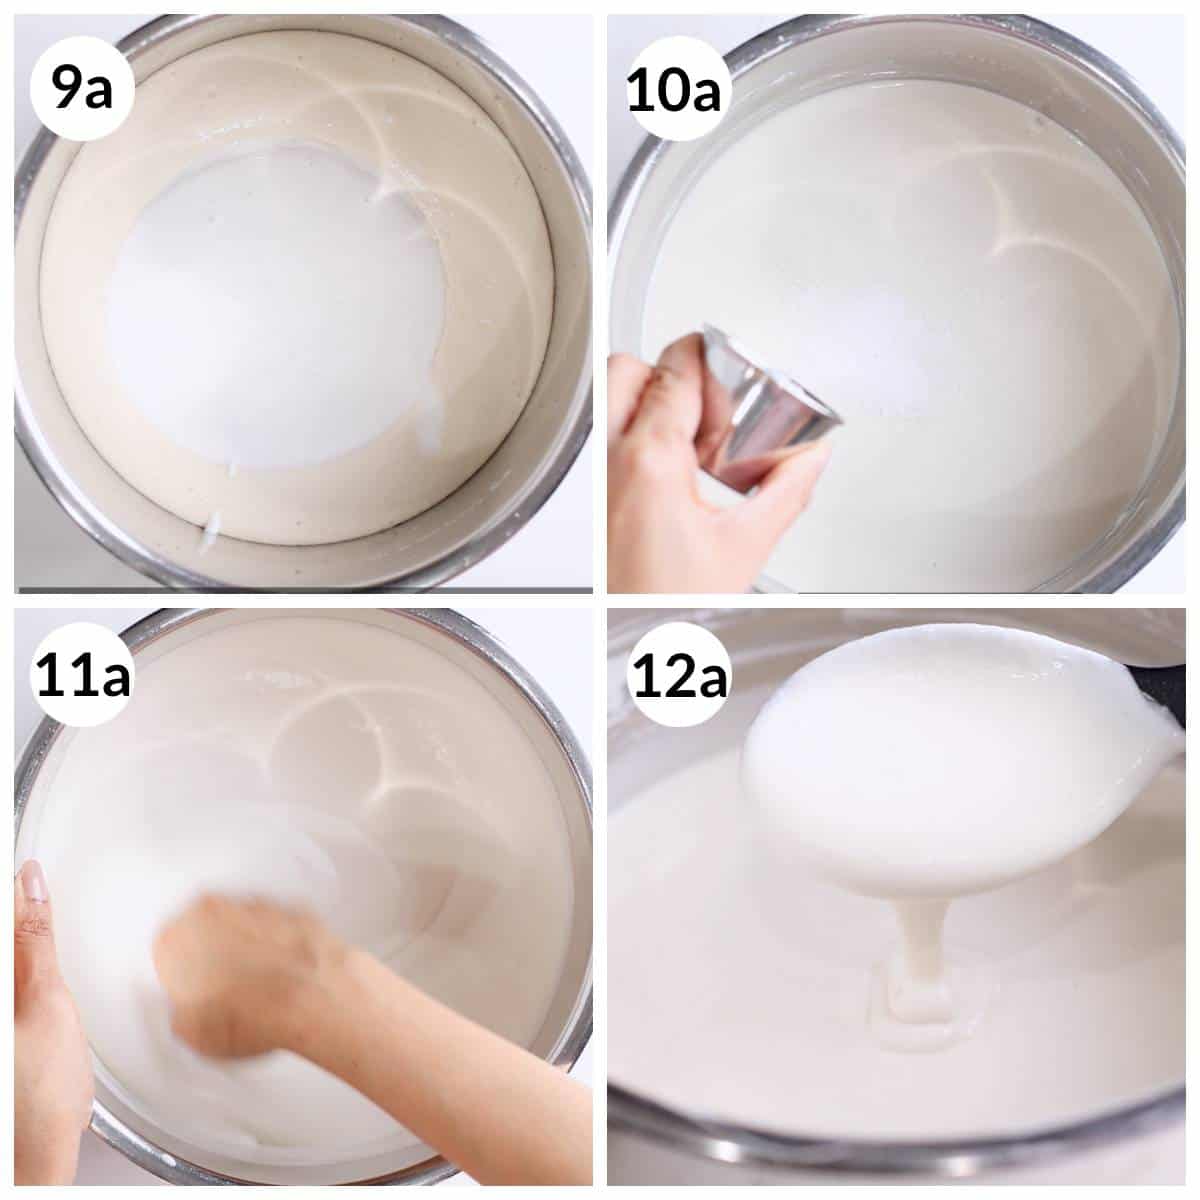 Steps for mixing idli batter made with rice